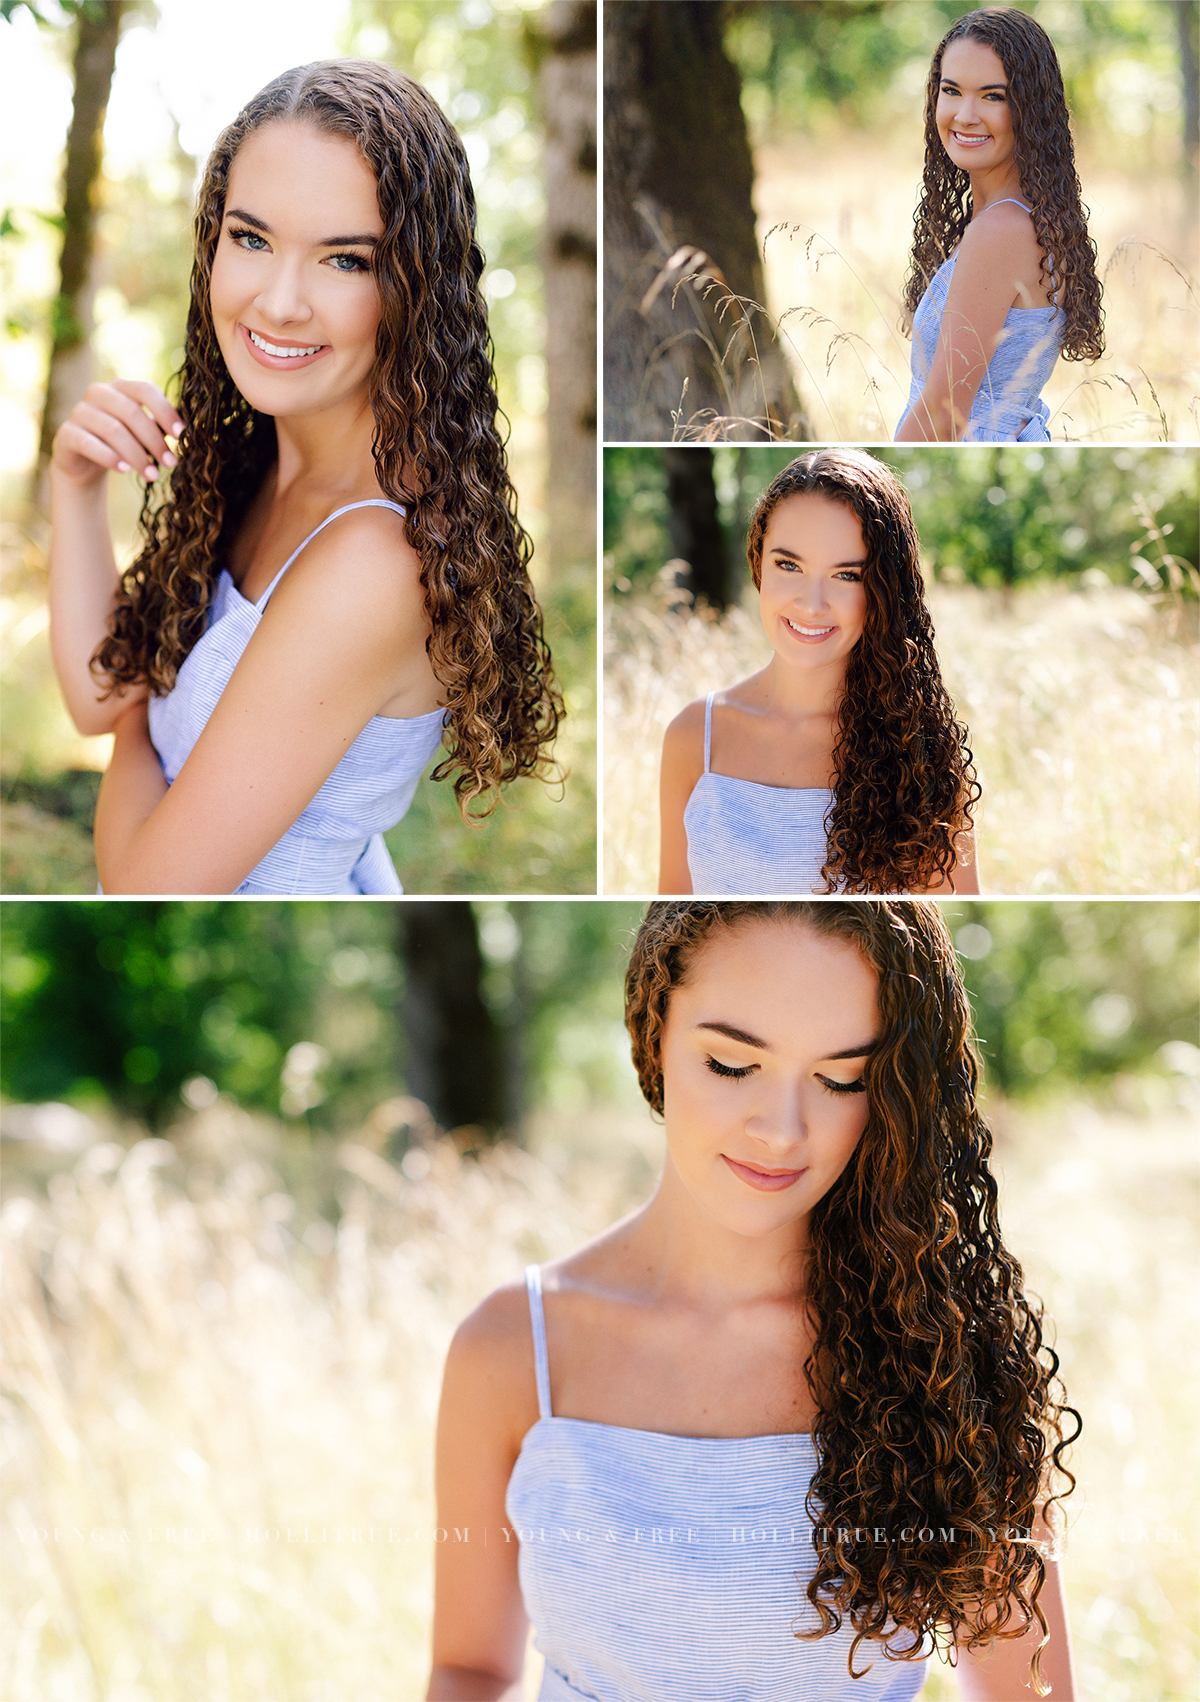 Gorgeous full sun senior pictures in a lush, natural park in Eugene, Oregon | Holli True Photography